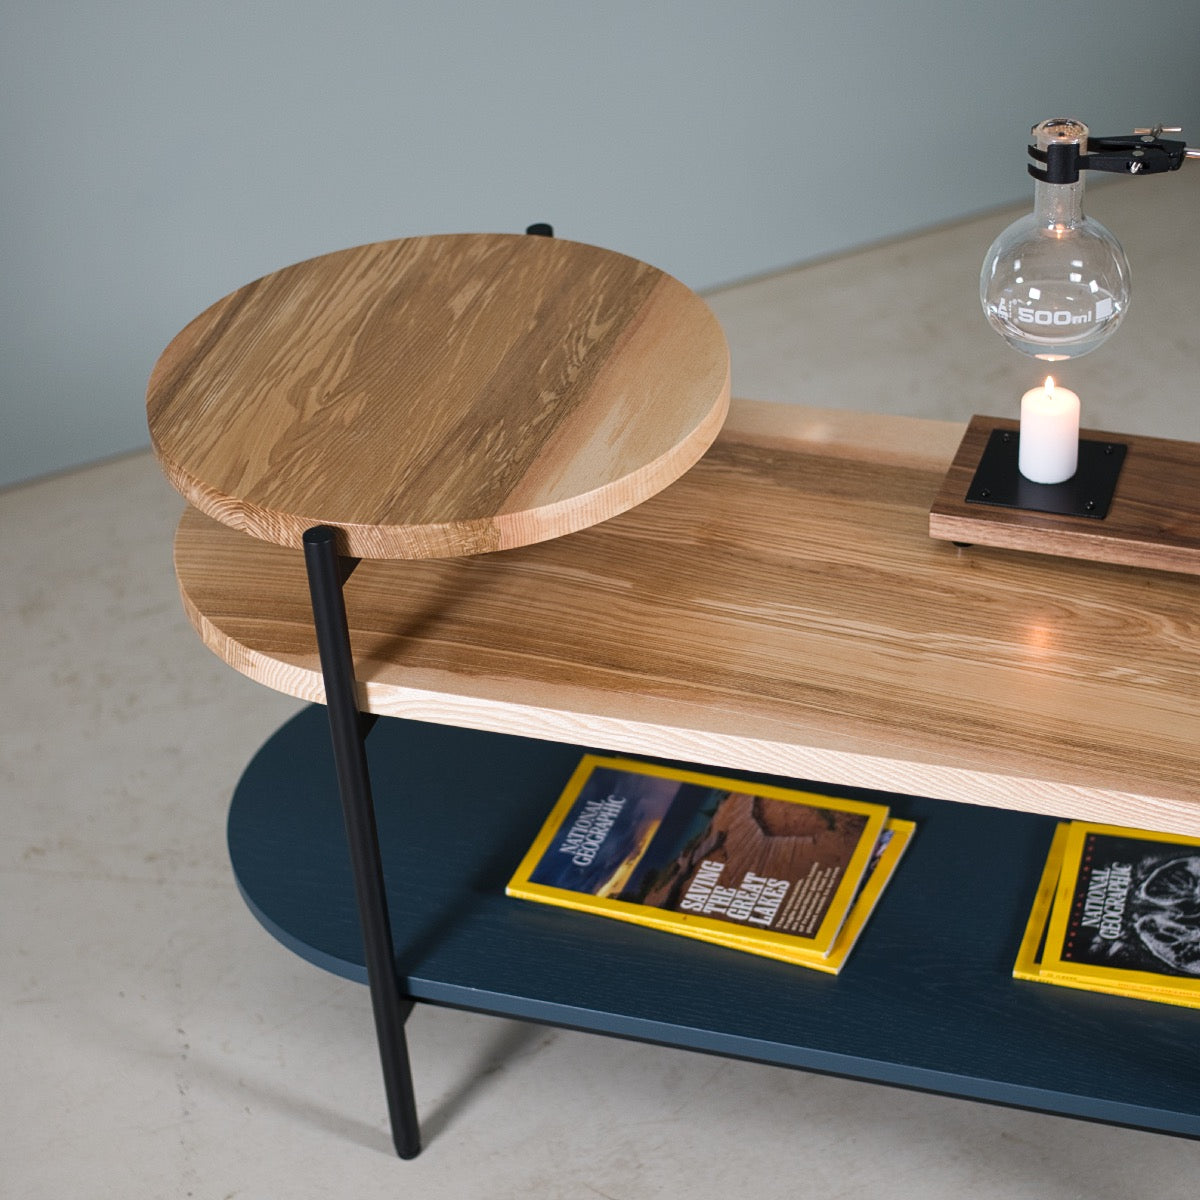 An image of the Coffee Table, Level product available from Koda Studios